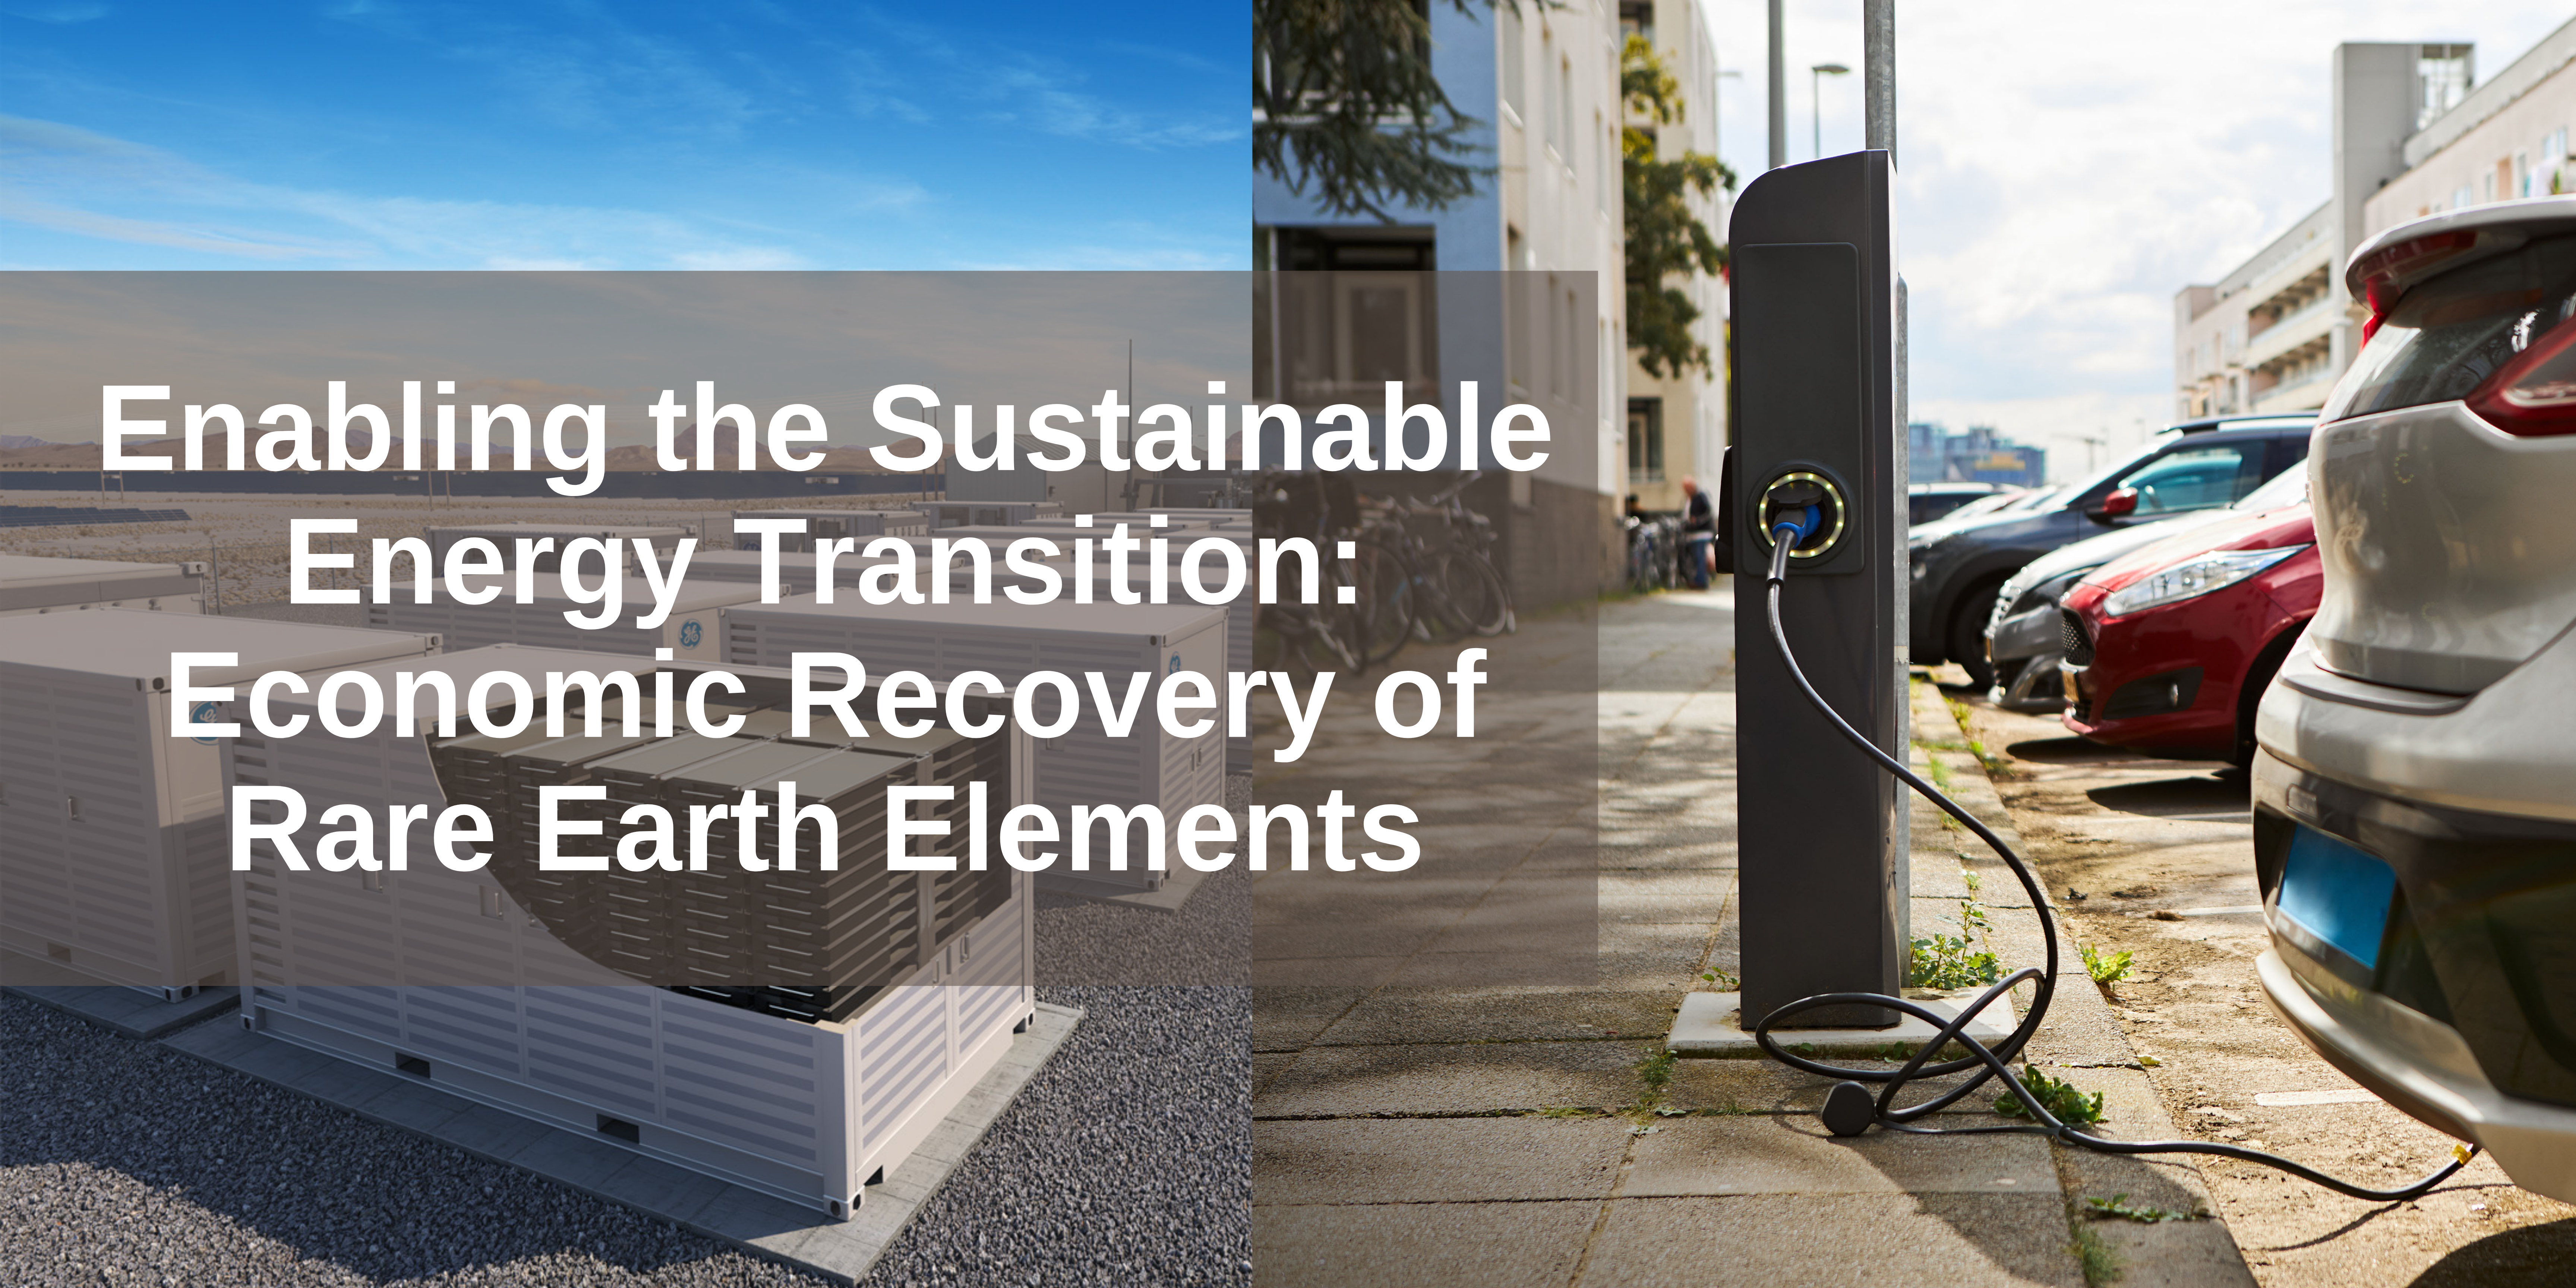 Enabling the Sustainable Energy Transition: Economic Recovery of Rare Earth Elements